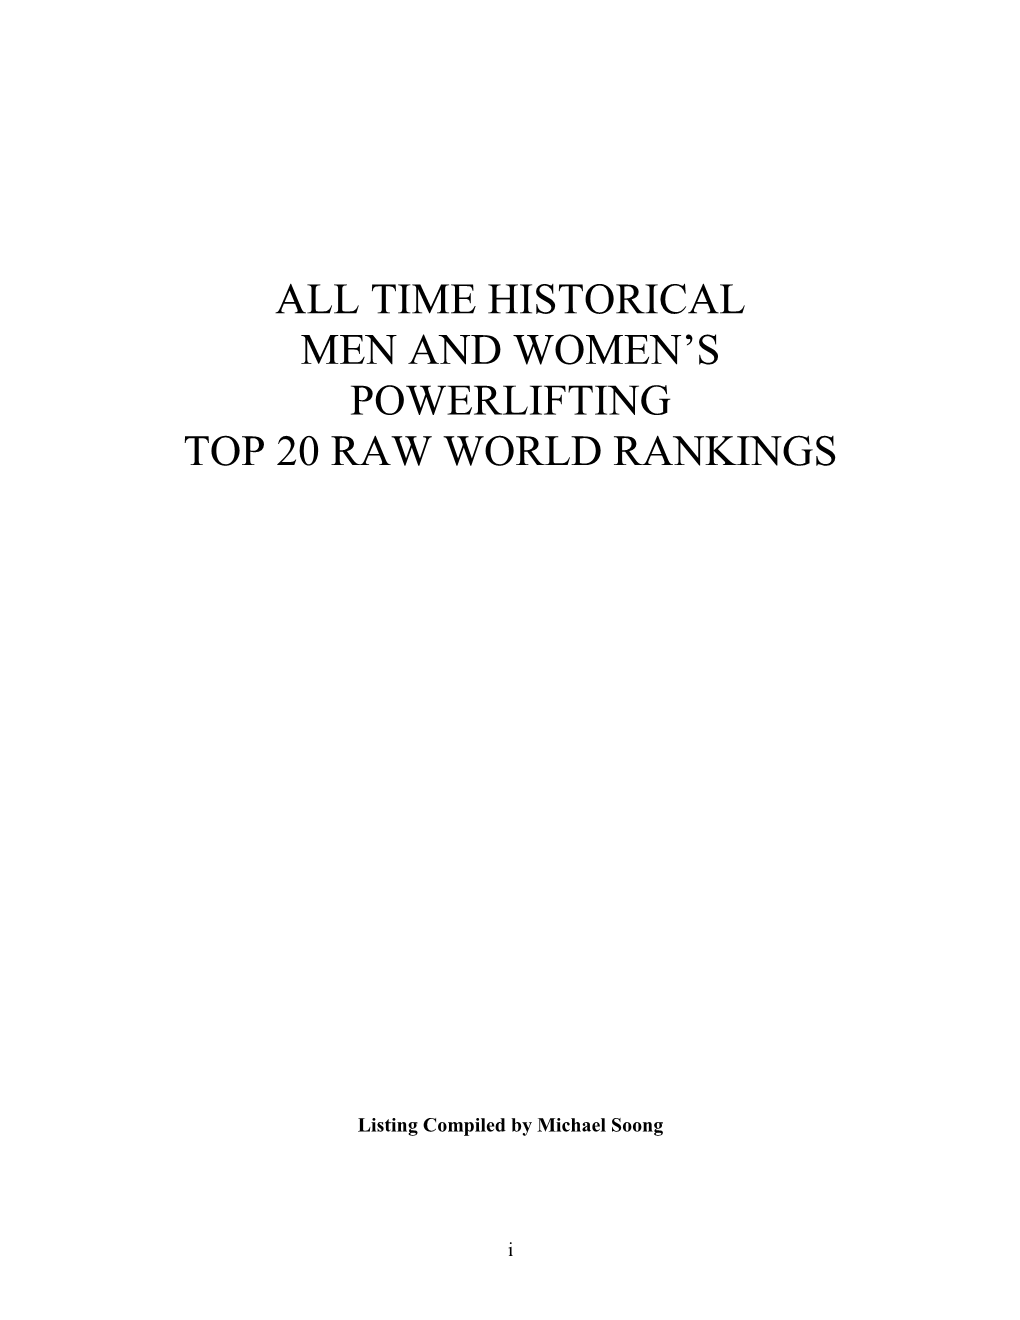 All Time Historical Men and Women's Powerlifting Top 20 Raw World Rankings